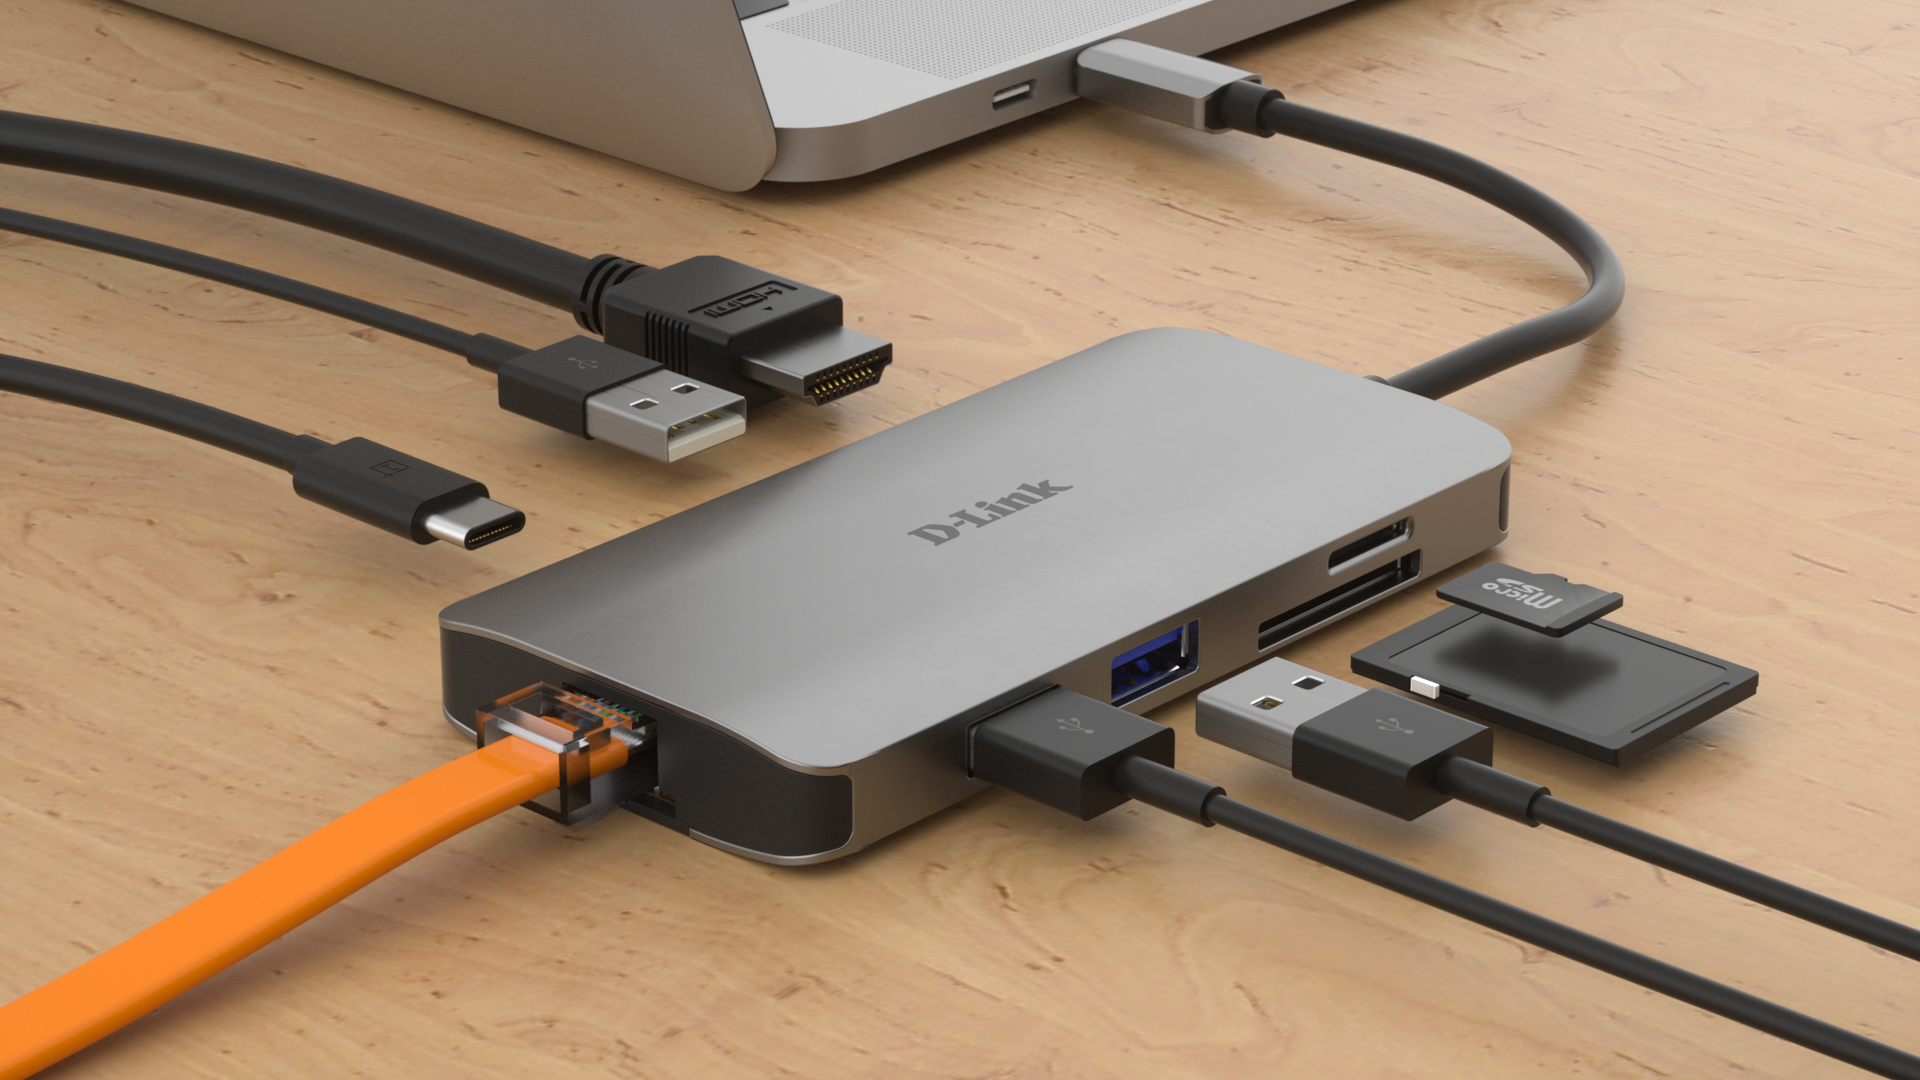 DUB-M810 8-in-1 USB-C Hub with HDMI/Ethernet/Card Reader/Power Delivery - on a desk connected to a laptop with example connections